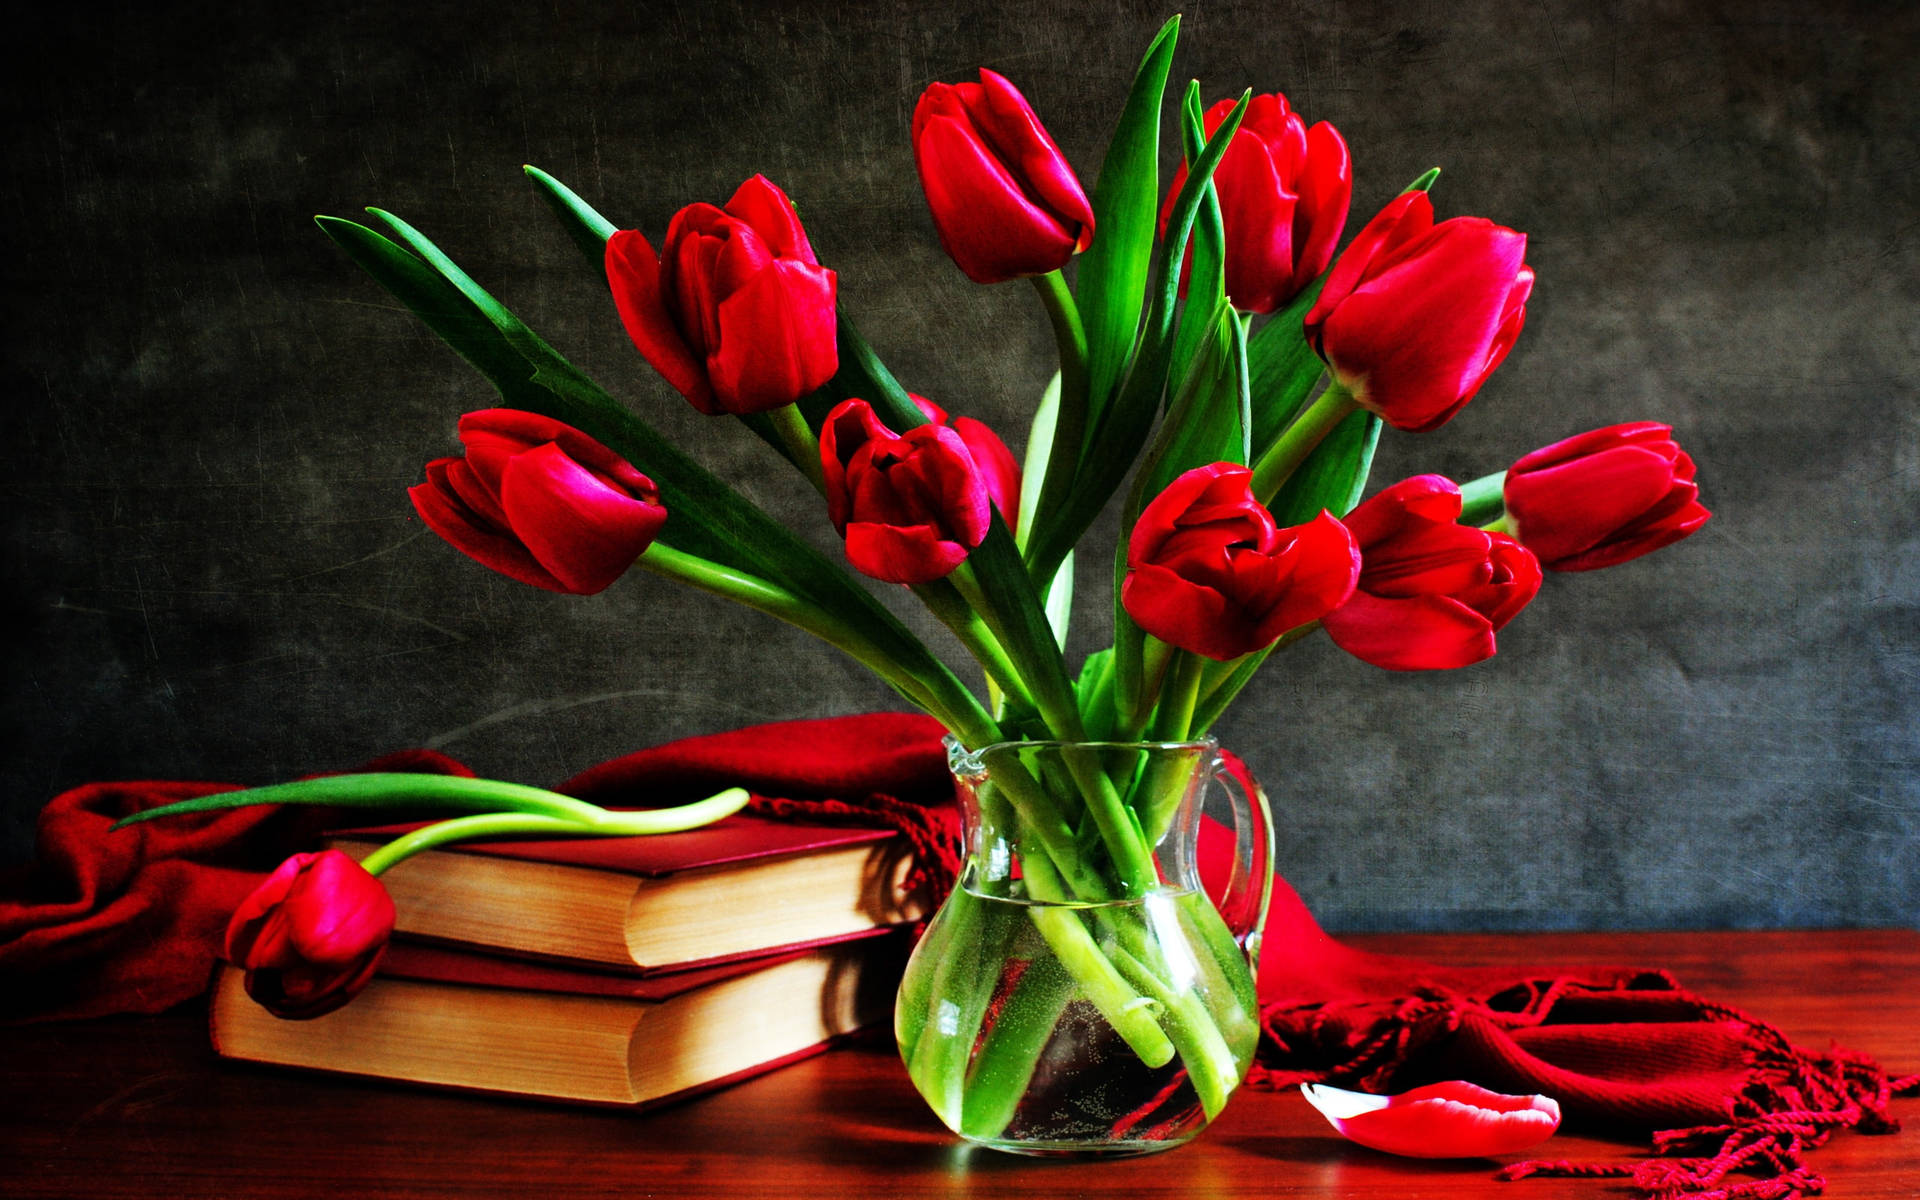 Static Red Roses And Books